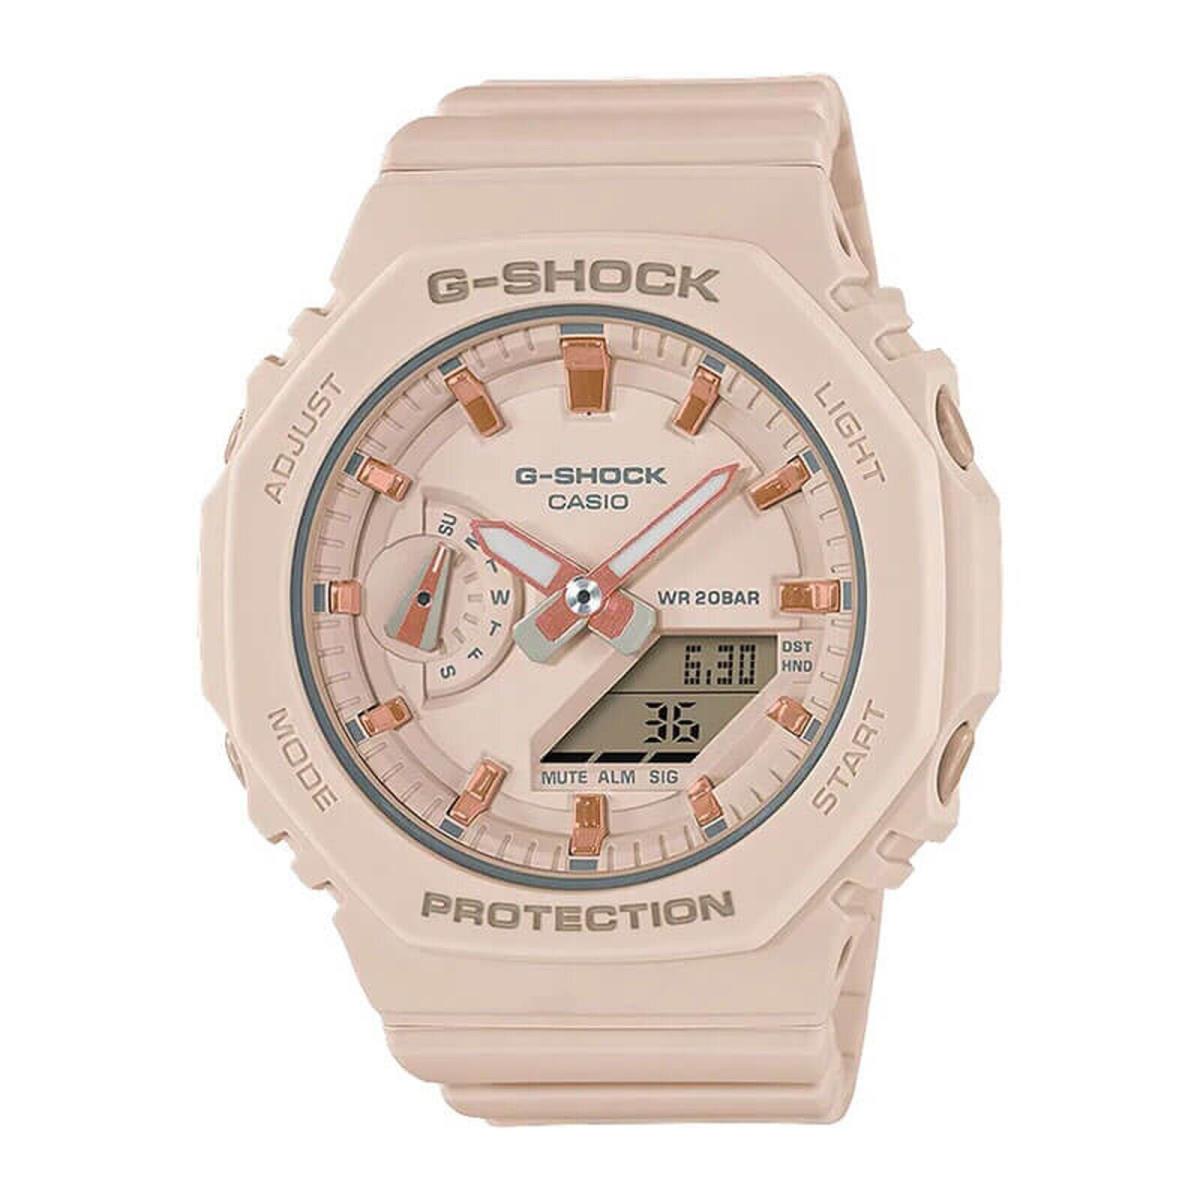 Casio G-shock GMAS2100-4A Pink Analog-digital Dial Resin Strap Watch - Face: Pink, Dial: Pink, Band: Beige